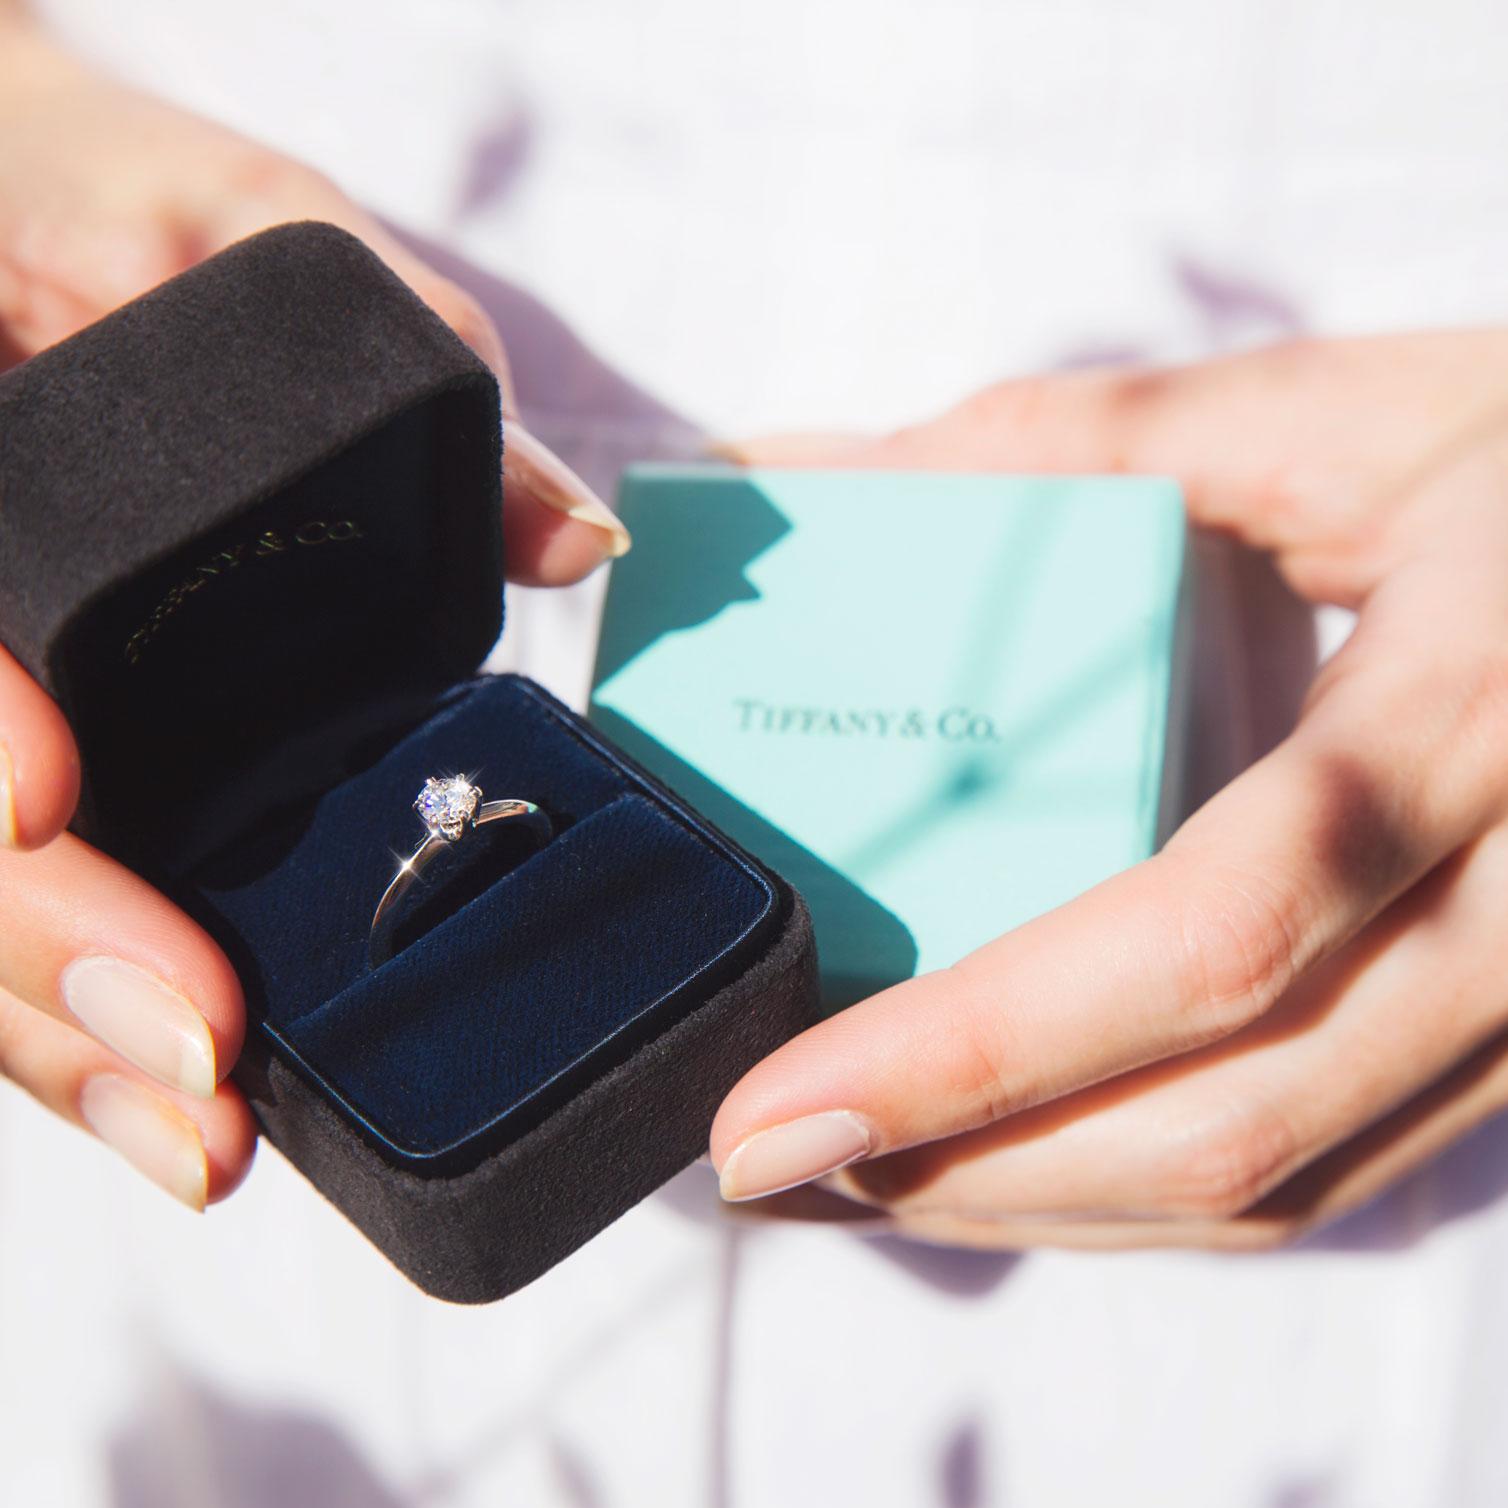 Tiffany & Co Platinum Solitaire Round Diamond Engagement Ring with Box and Cert 4